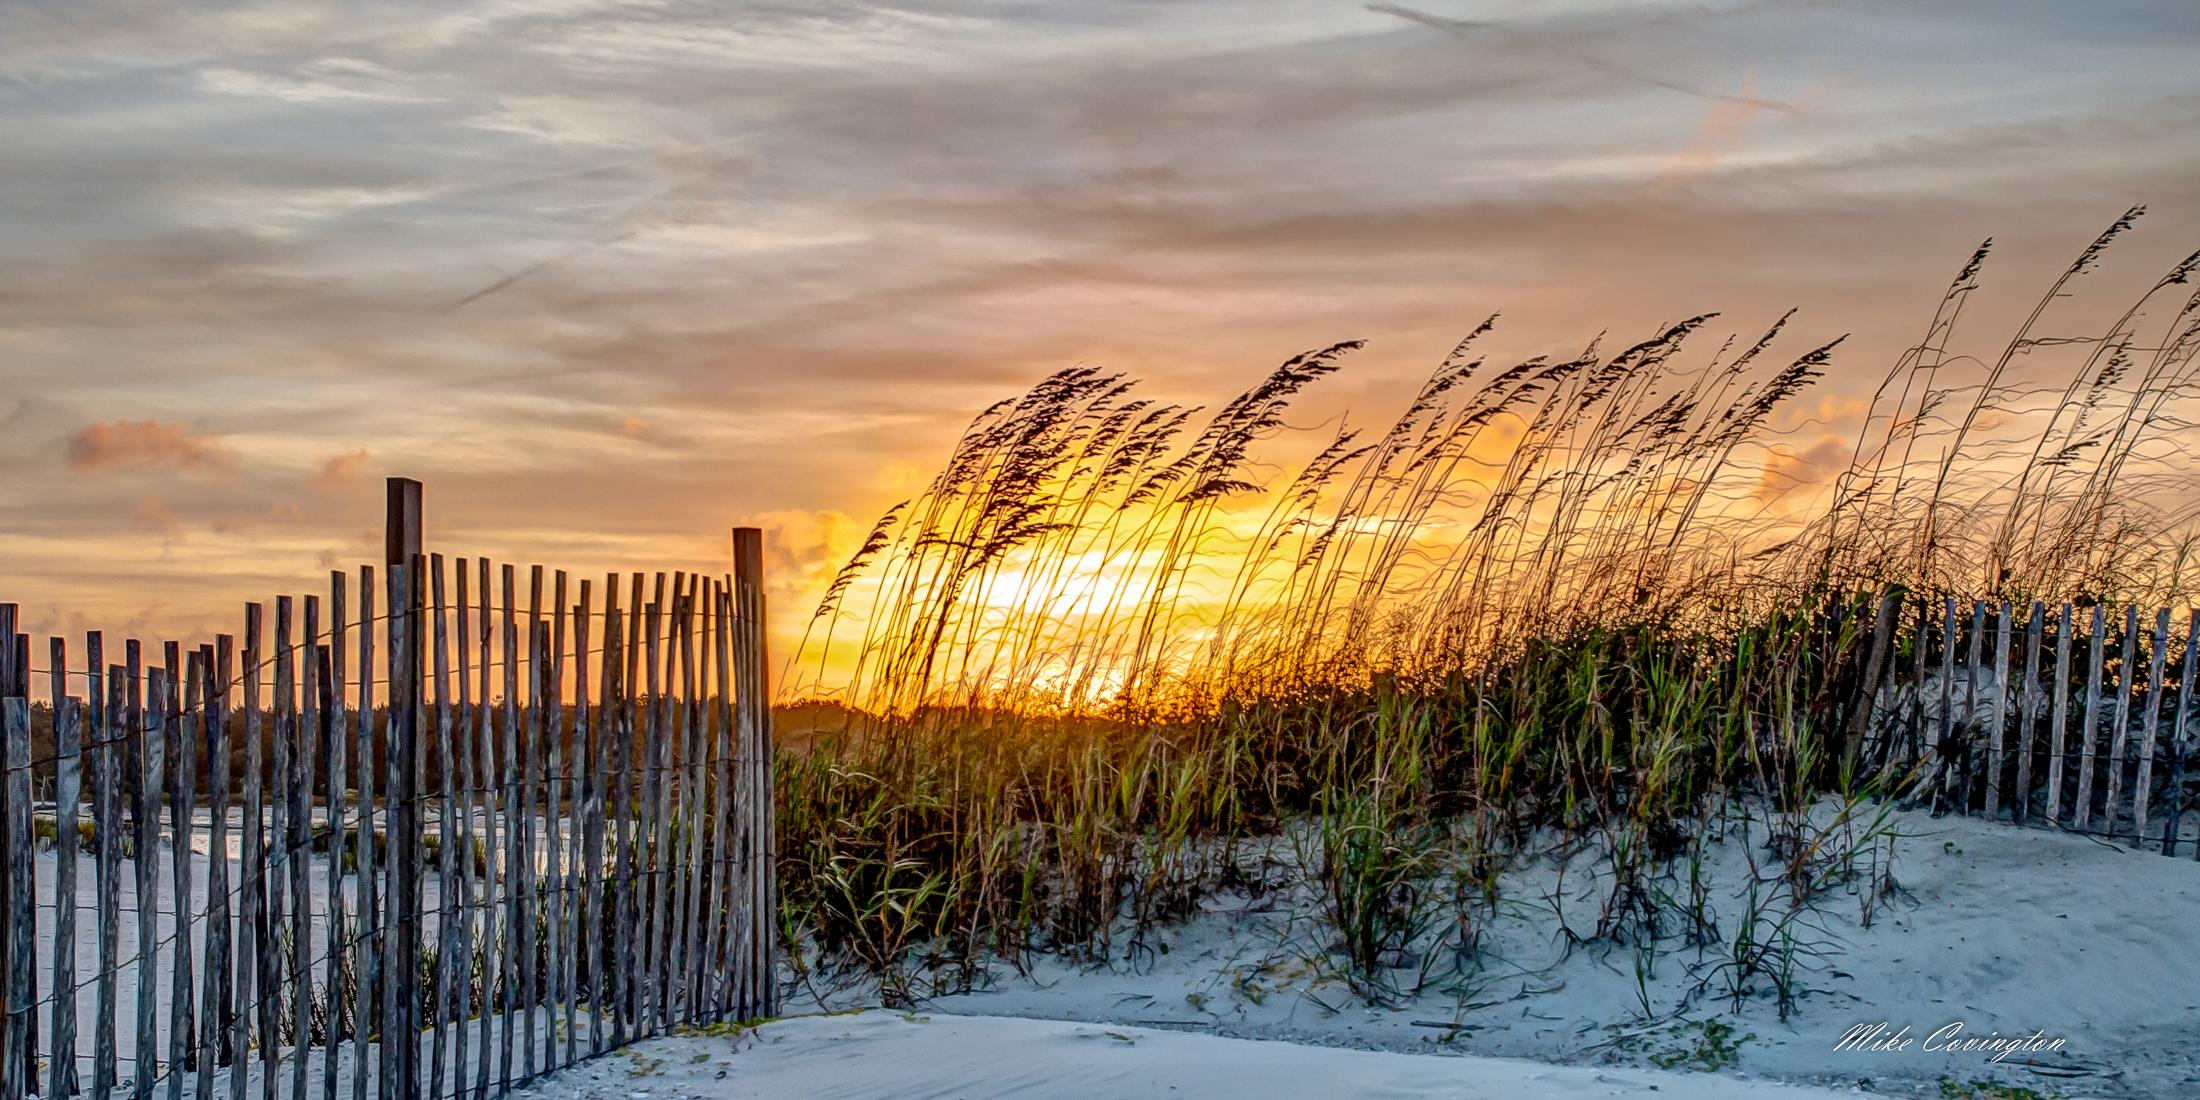 Myrtle Beach, SC and our surrounding areas has so much to offer as captured above by Mike Covington of Low Country Photos.  Vast beaches and beautiful scenery abounds.  An absolutely wonderful place to live!  Call me today if you are ready to make that move!